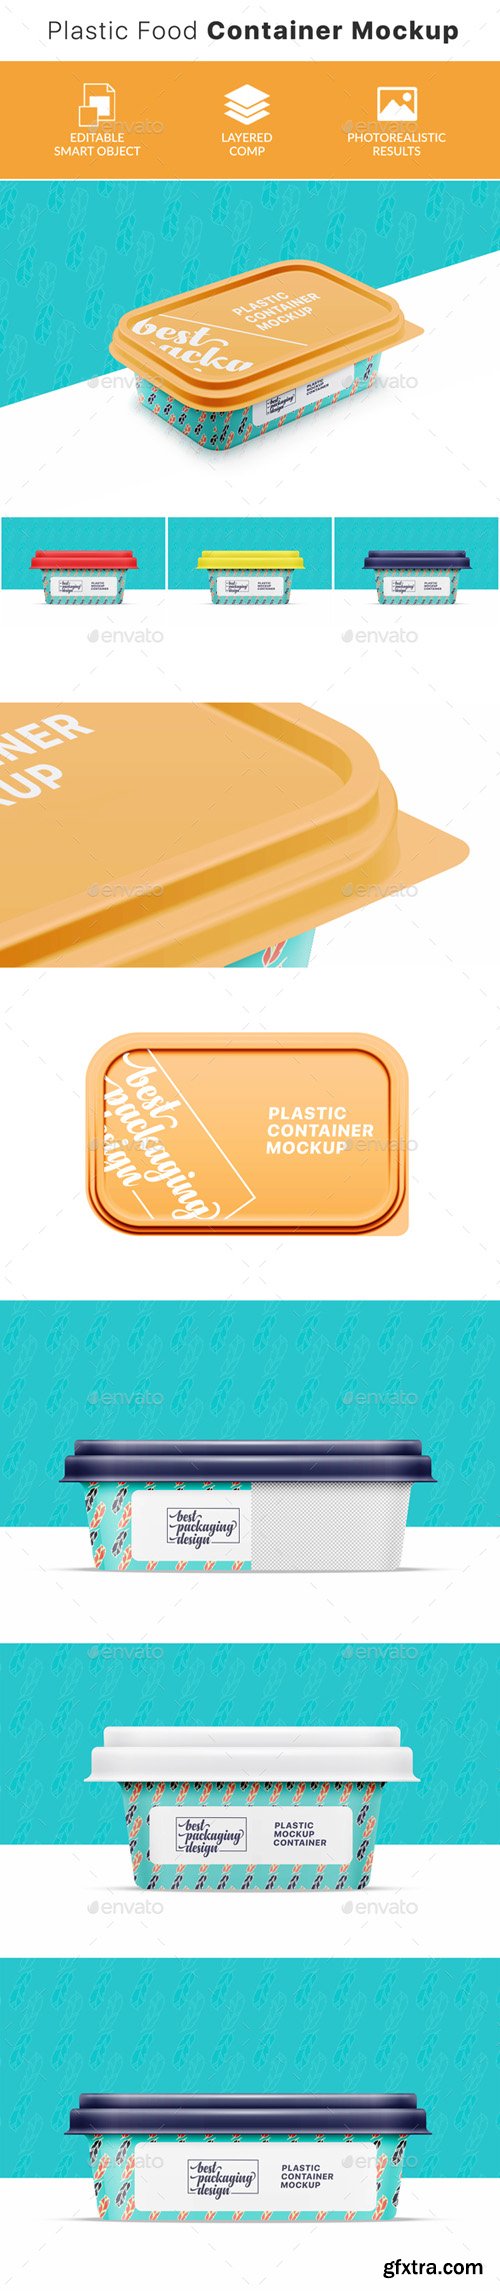 GR - Plastic Food Container Mockup 21001715